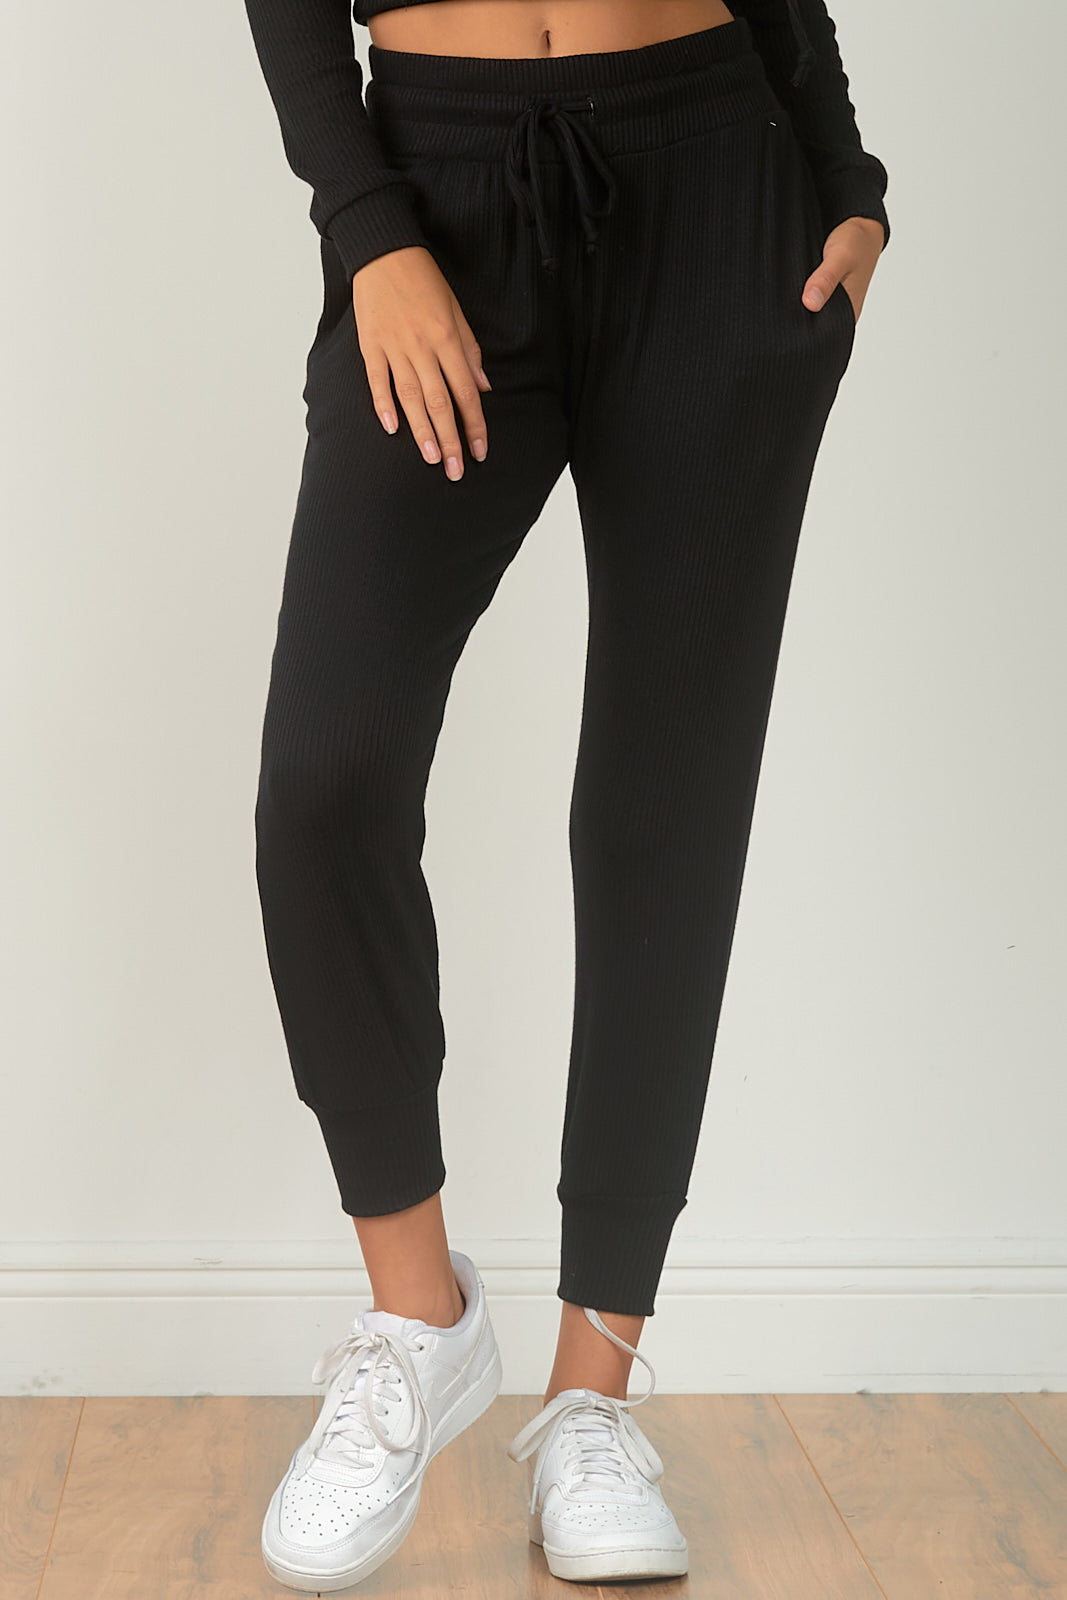 Blumin's Ribbed Joggers: Cozy & Perfect for Easy Living!